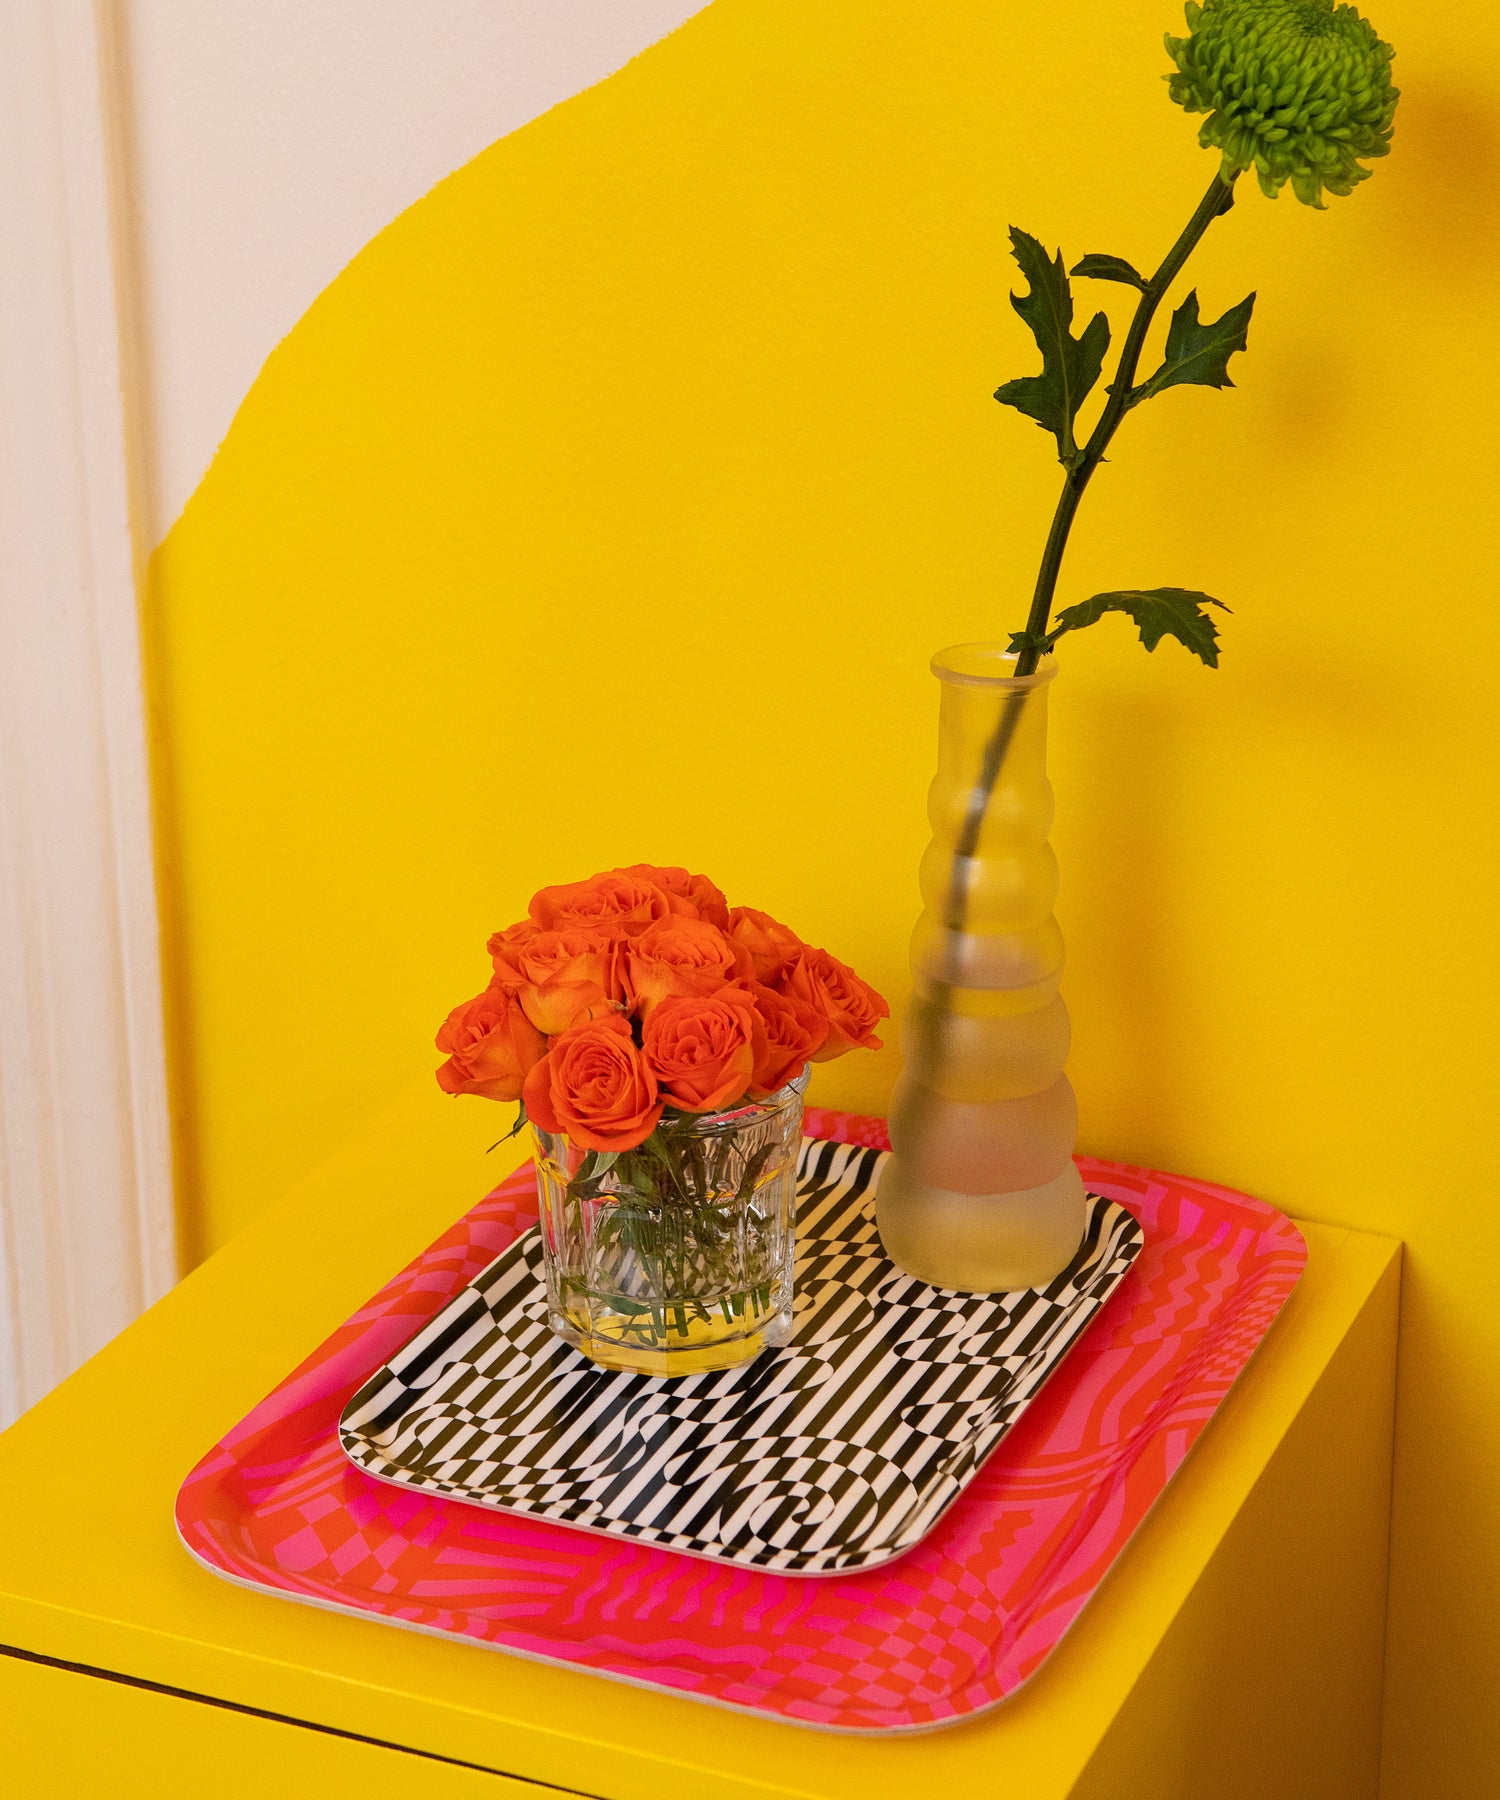 Detail of the Dazzle Tray stacked on top of the Wiggles and Waves Tray holding a small and large flower vase. These are sitting on top of a yellow nightstand.